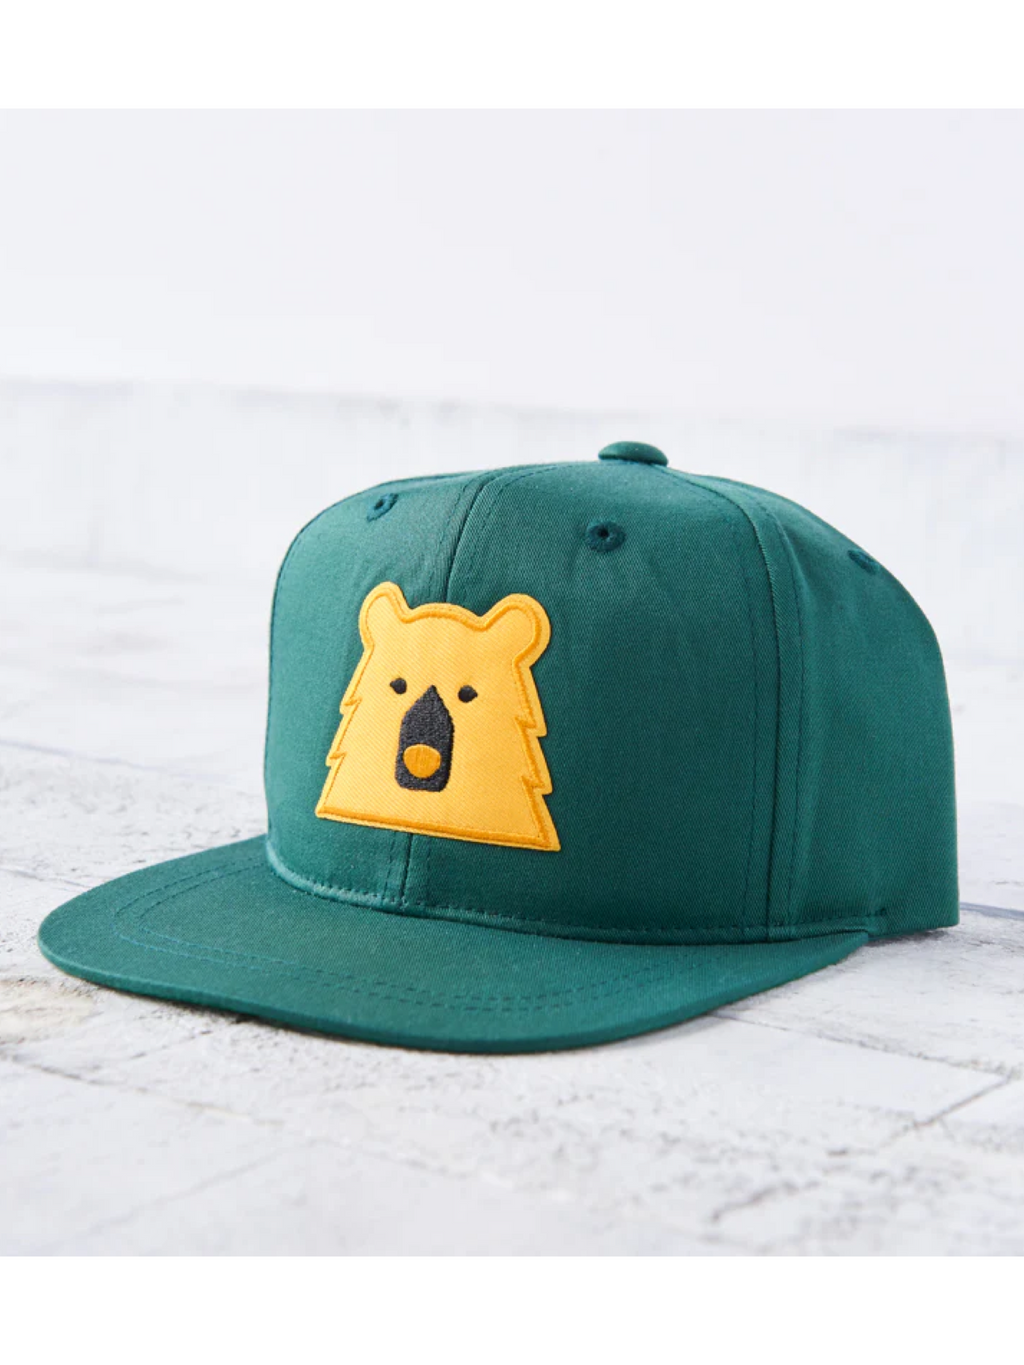 North Standard Kids/Youth Spruce/Yellow Bear Hat